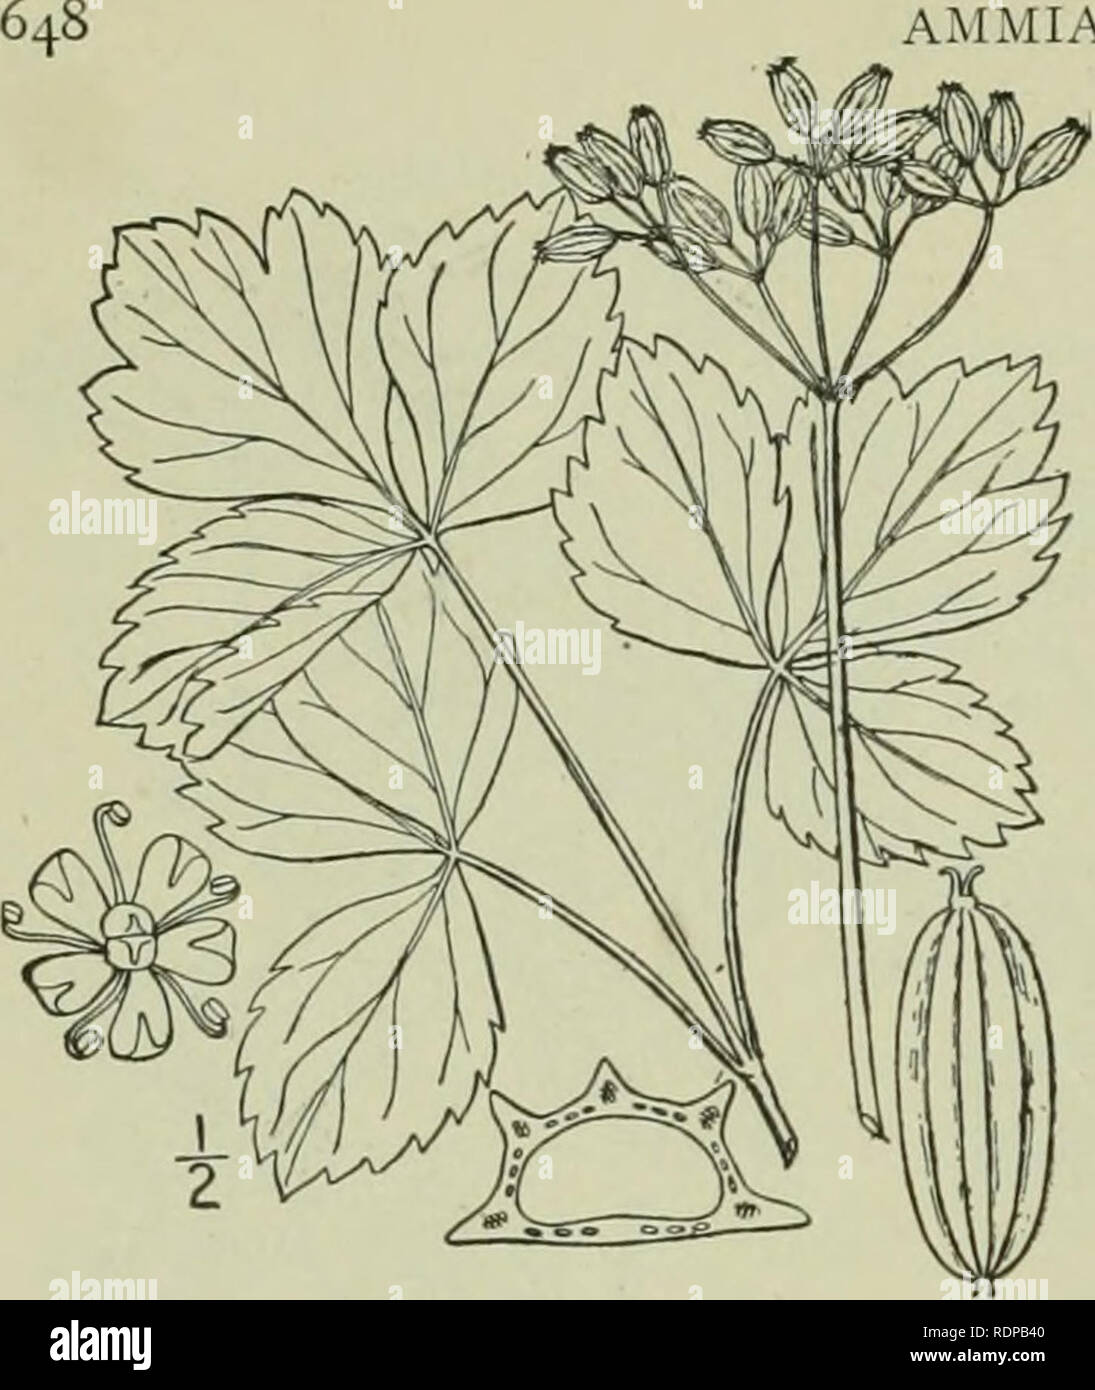 . An illustrated flora of the northern United States, Canada and the British possessions : from Newfoundland to the parallel of the southern boundary of Virginia and from the Atlantic Ocean westward to the 102nd meridian. Botany. AMMIACEAE. Vol. IT. 2. Ligusticum scoticum L. Scotch or Sea Lovage. Sea Parsley. Fig. 3152. Ligusticum scoticum L. Sp. PI. 250. 1753. Stem simple, or rarely slightly branched, lo'-3° high. Leaves mostly biternate, the segments thick and fleshy, broadly obovate- ovate or oval, 1-4' long, shining, obtuse or acute at the apex, narrowed or the terminal one rounded at the  Stock Photo